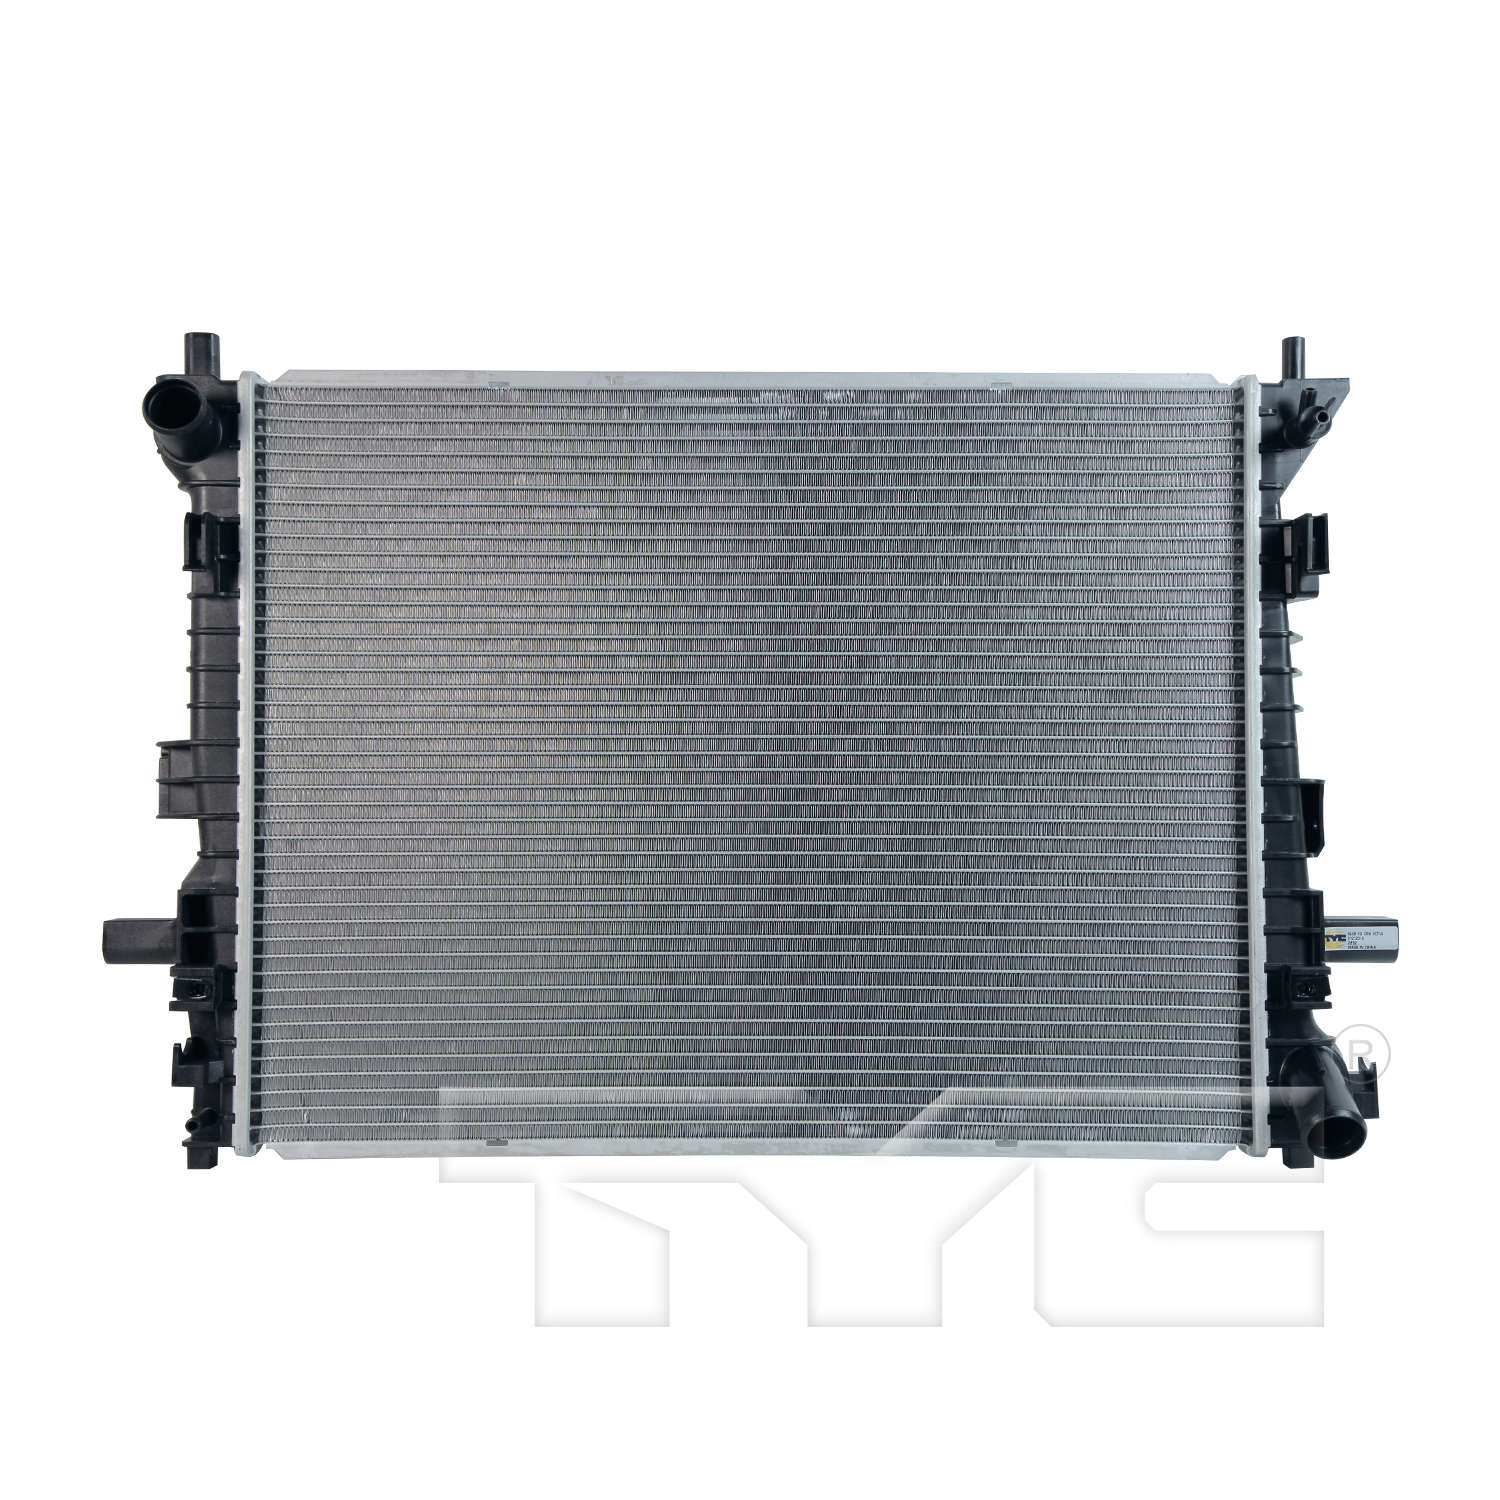 Aftermarket RADIATORS for LINCOLN - TOWN CAR, TOWN CAR,06-11,Radiator assembly